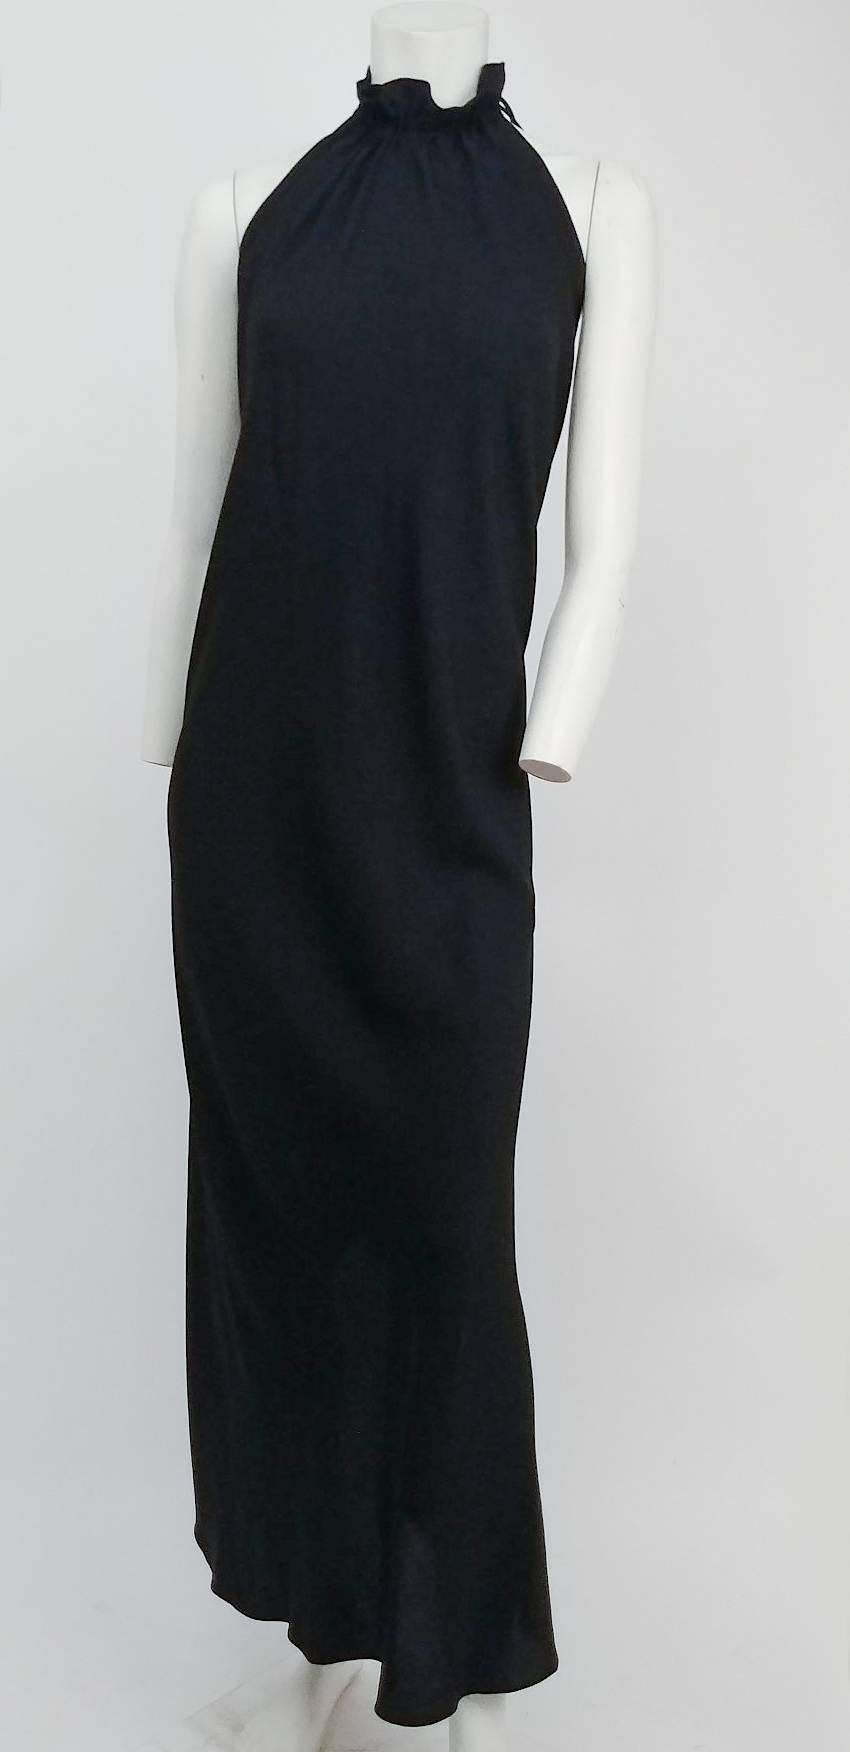 80s Crepe Halter Dress & Jacket Set. Adjustable straps allow for dress to be worn high at neck or lower. Low-cut deep V back. Cape-like jacket has no closures, ties at neck. 